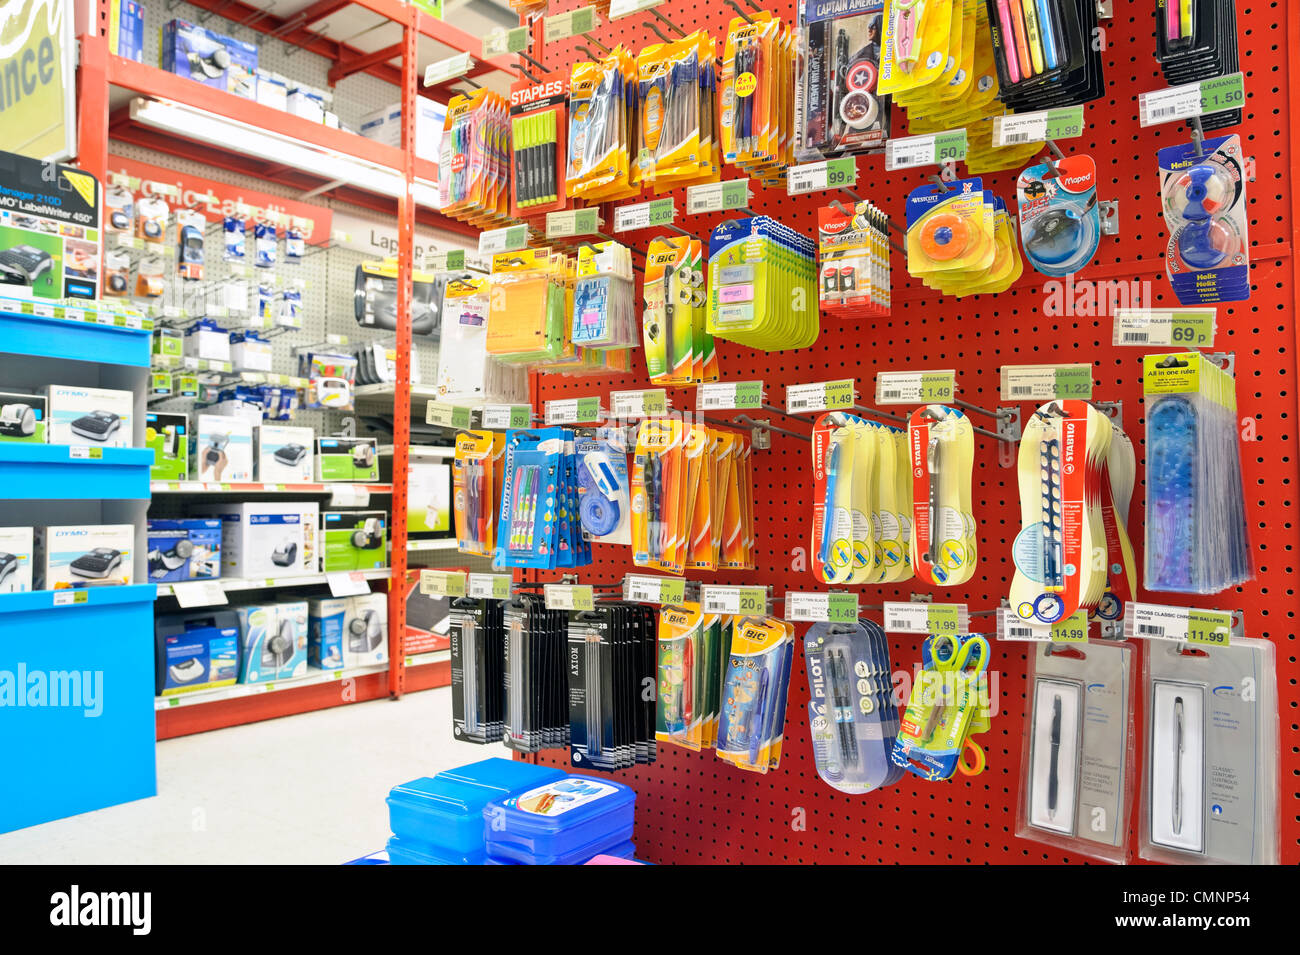 Pens, stationery & office supplies for sale inside a Staples shop in Kidderminster, UK. Stock Photo